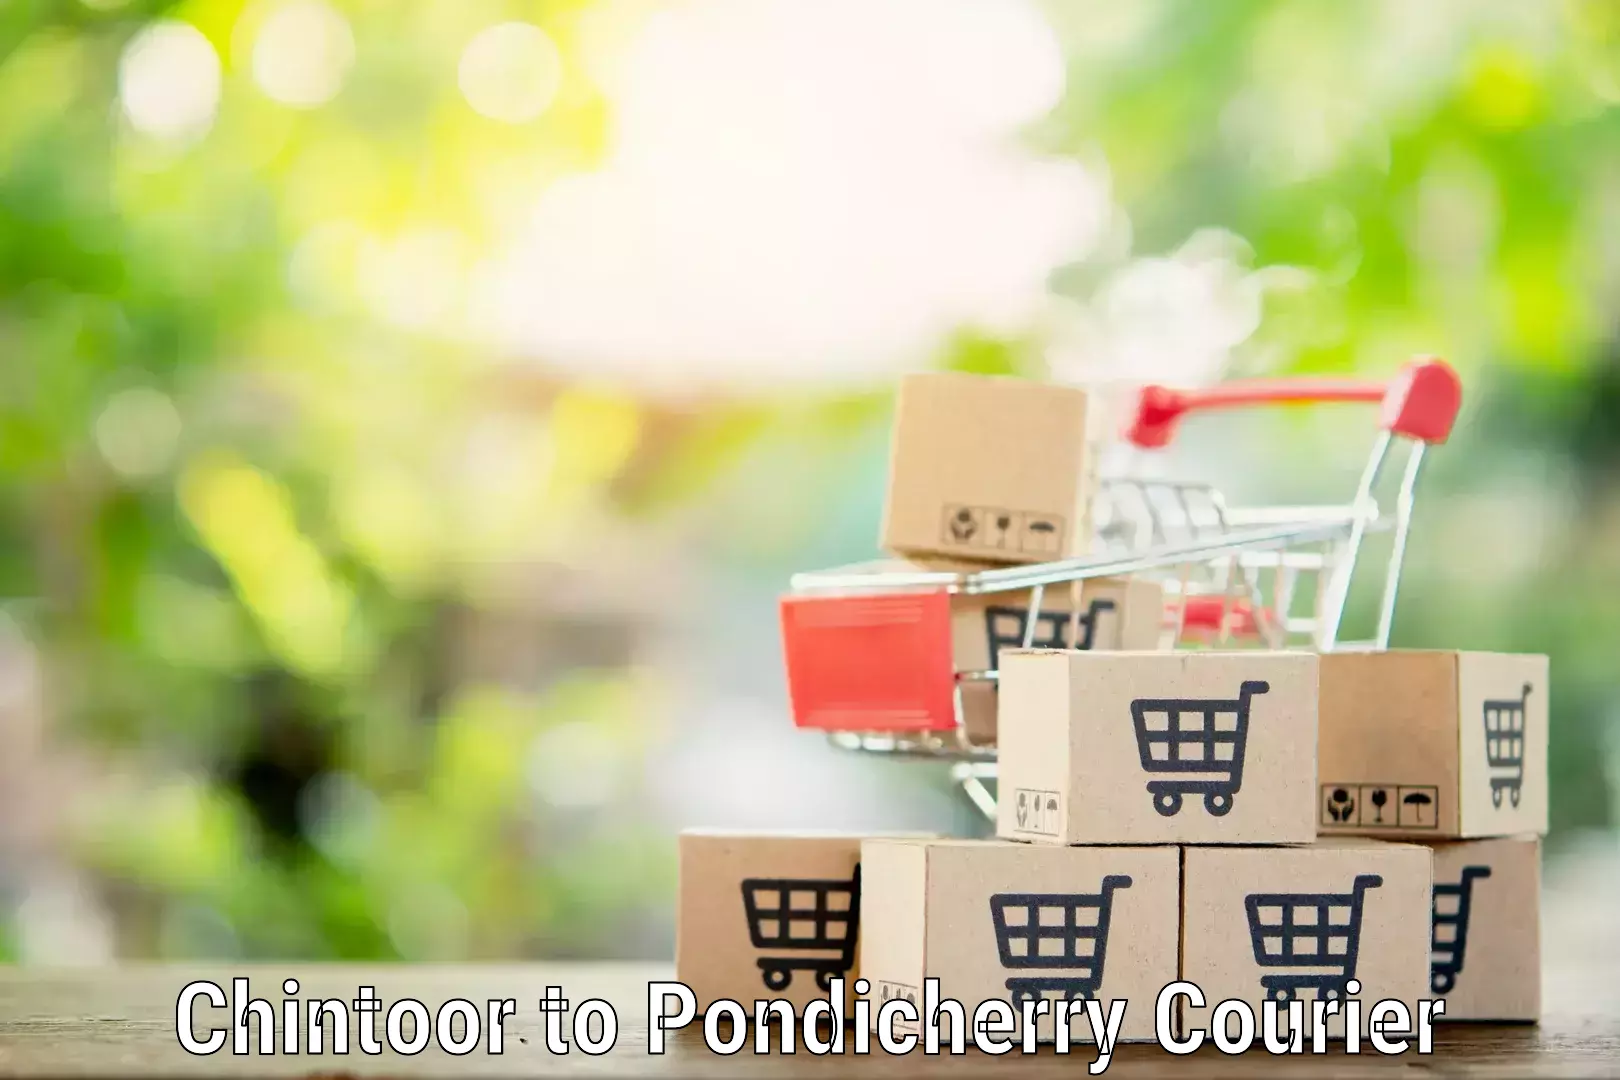 Professional movers and packers in Chintoor to Pondicherry